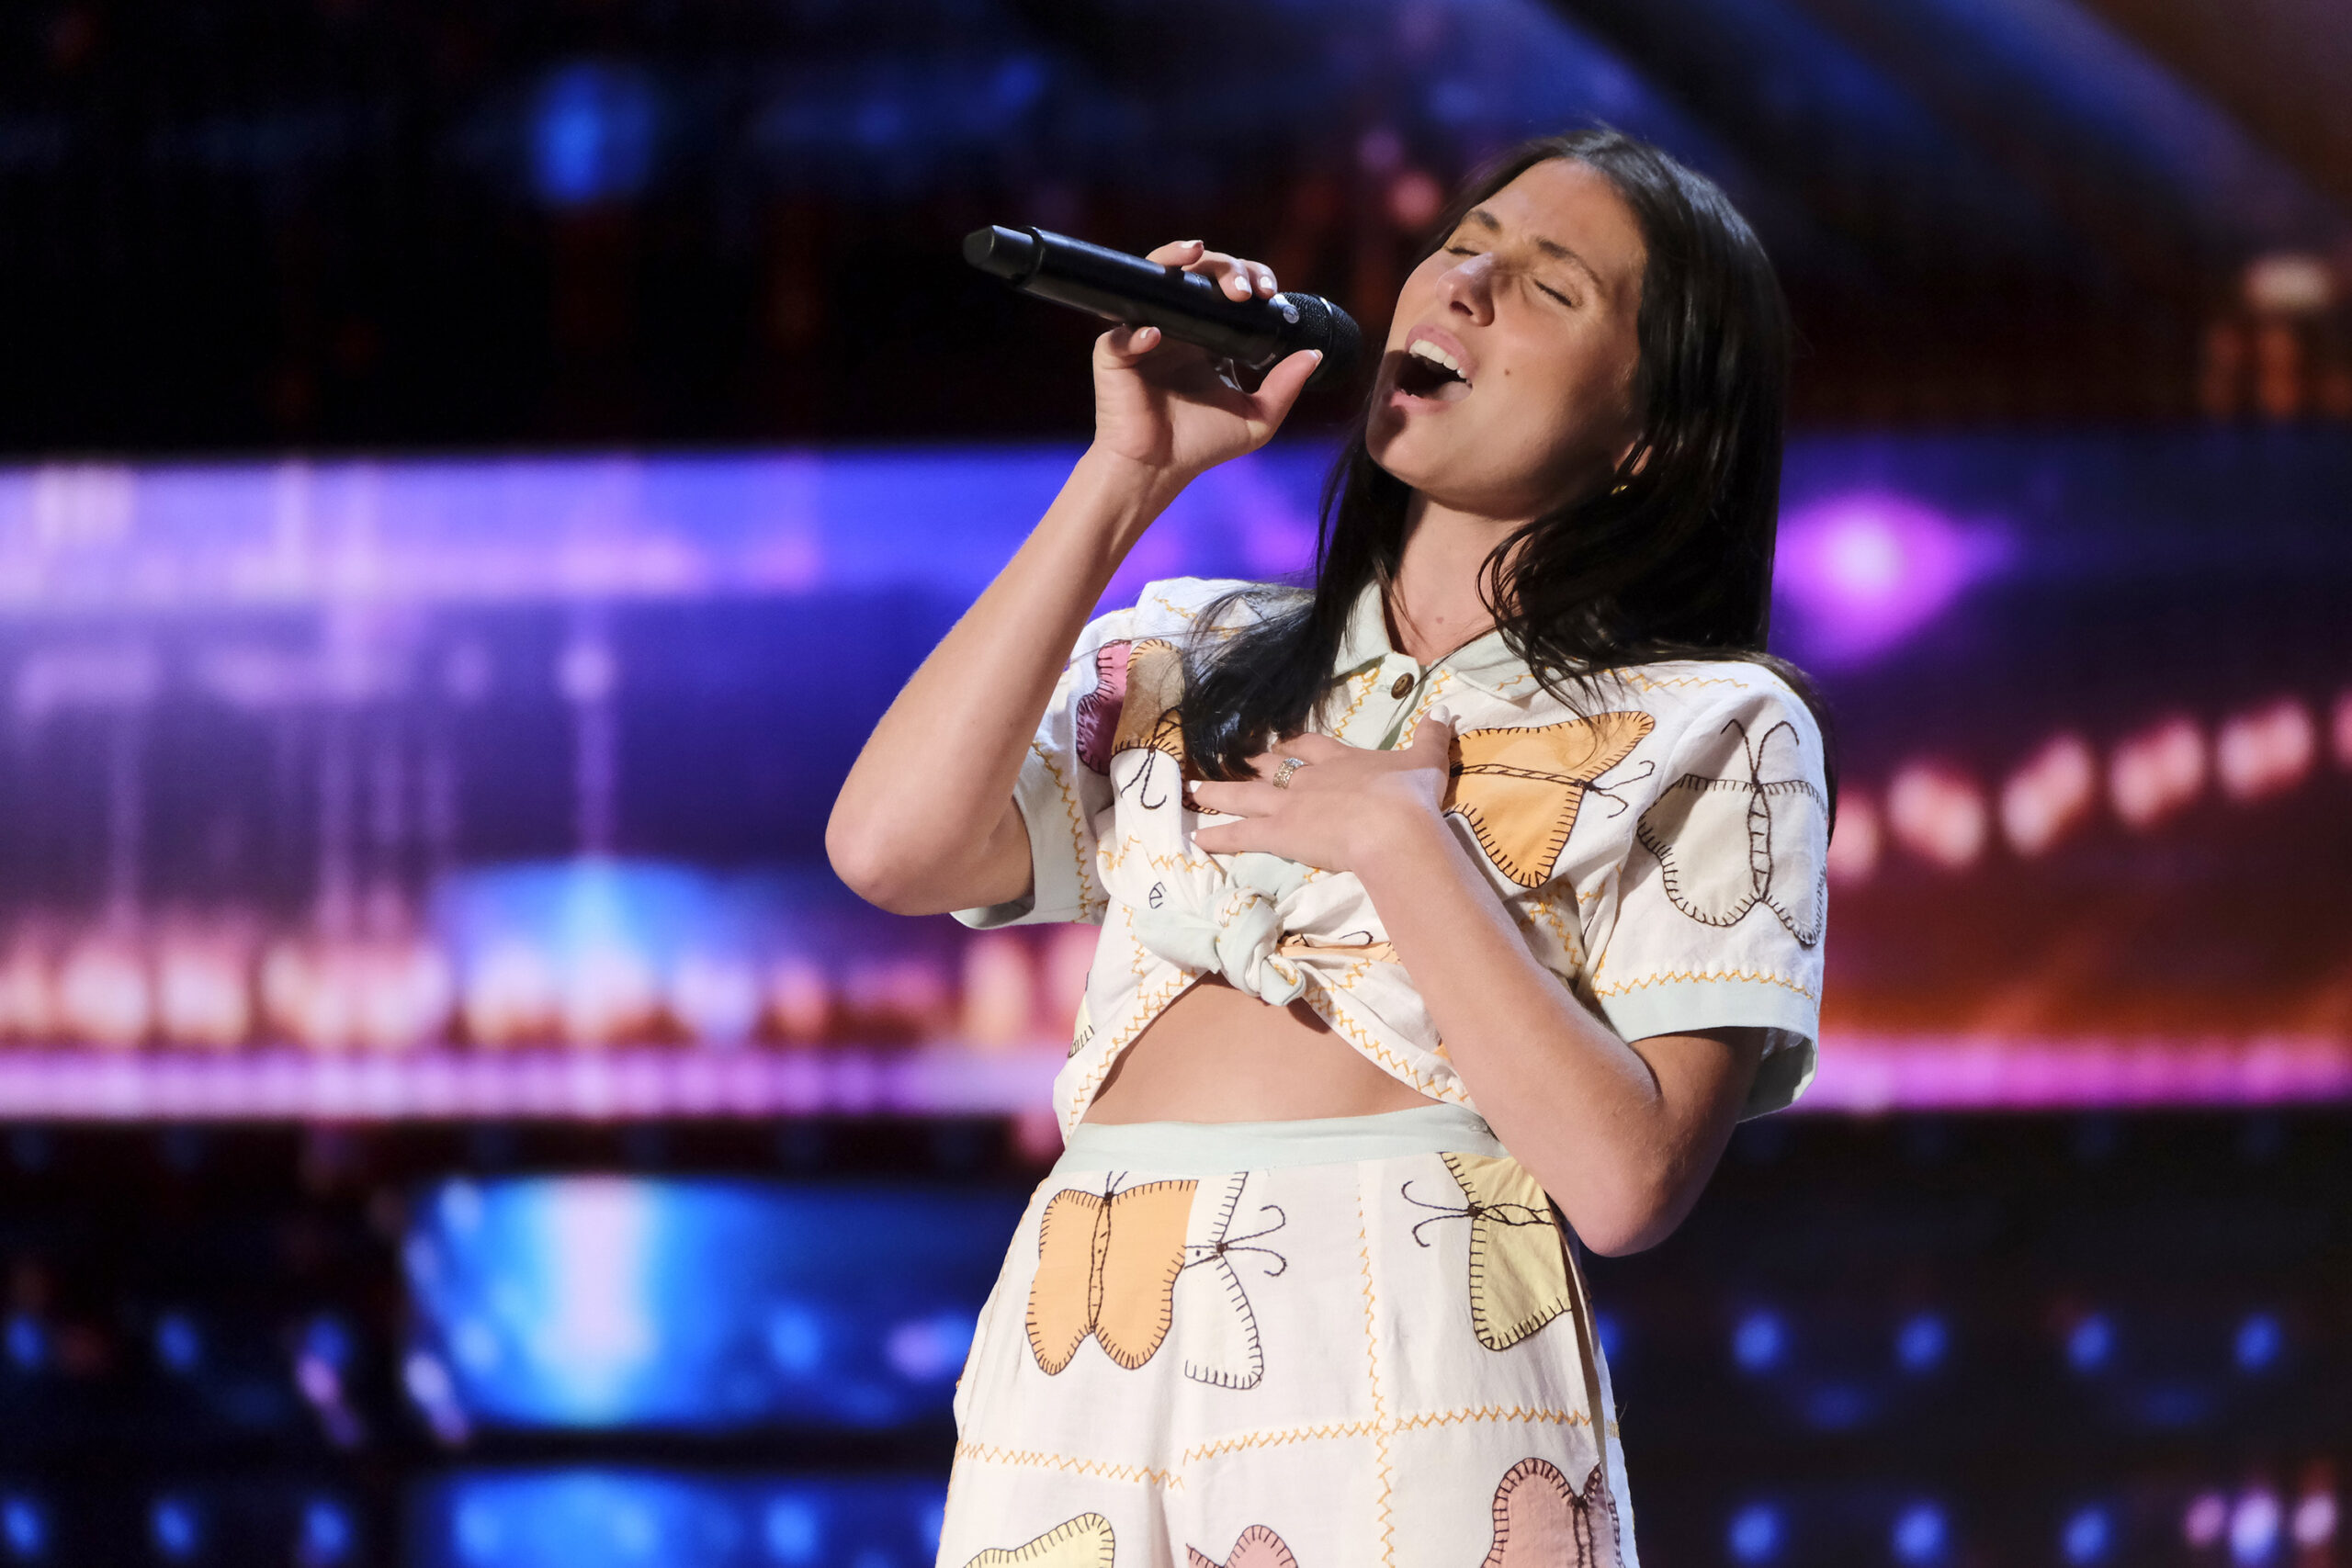 America's Got Talent 2022 Auditions 5 Spoilers - Meet the Acts (Photos)